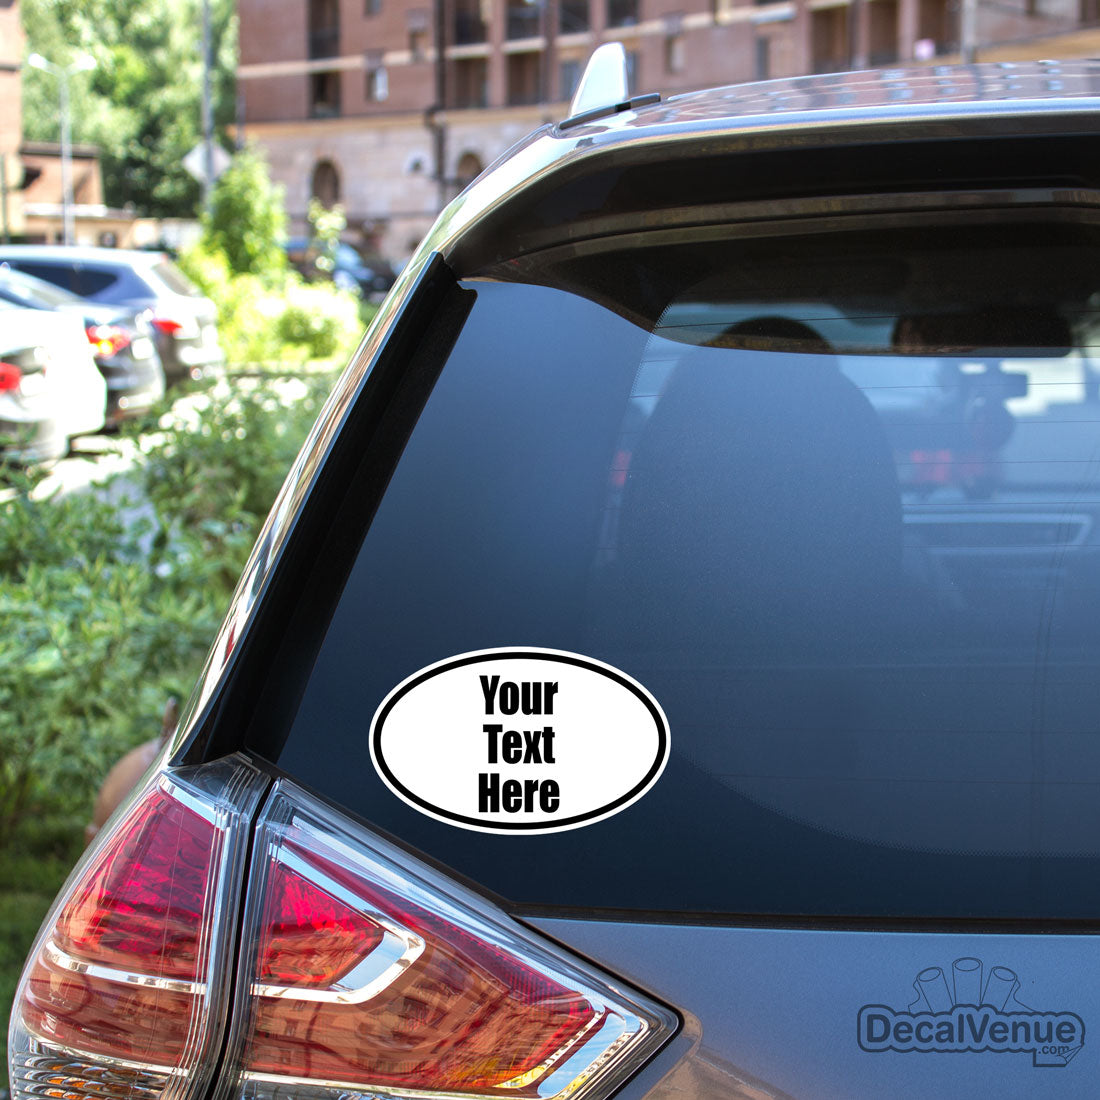 Personalized Oval Vinyl Bumper Stickers - Your Custom Text